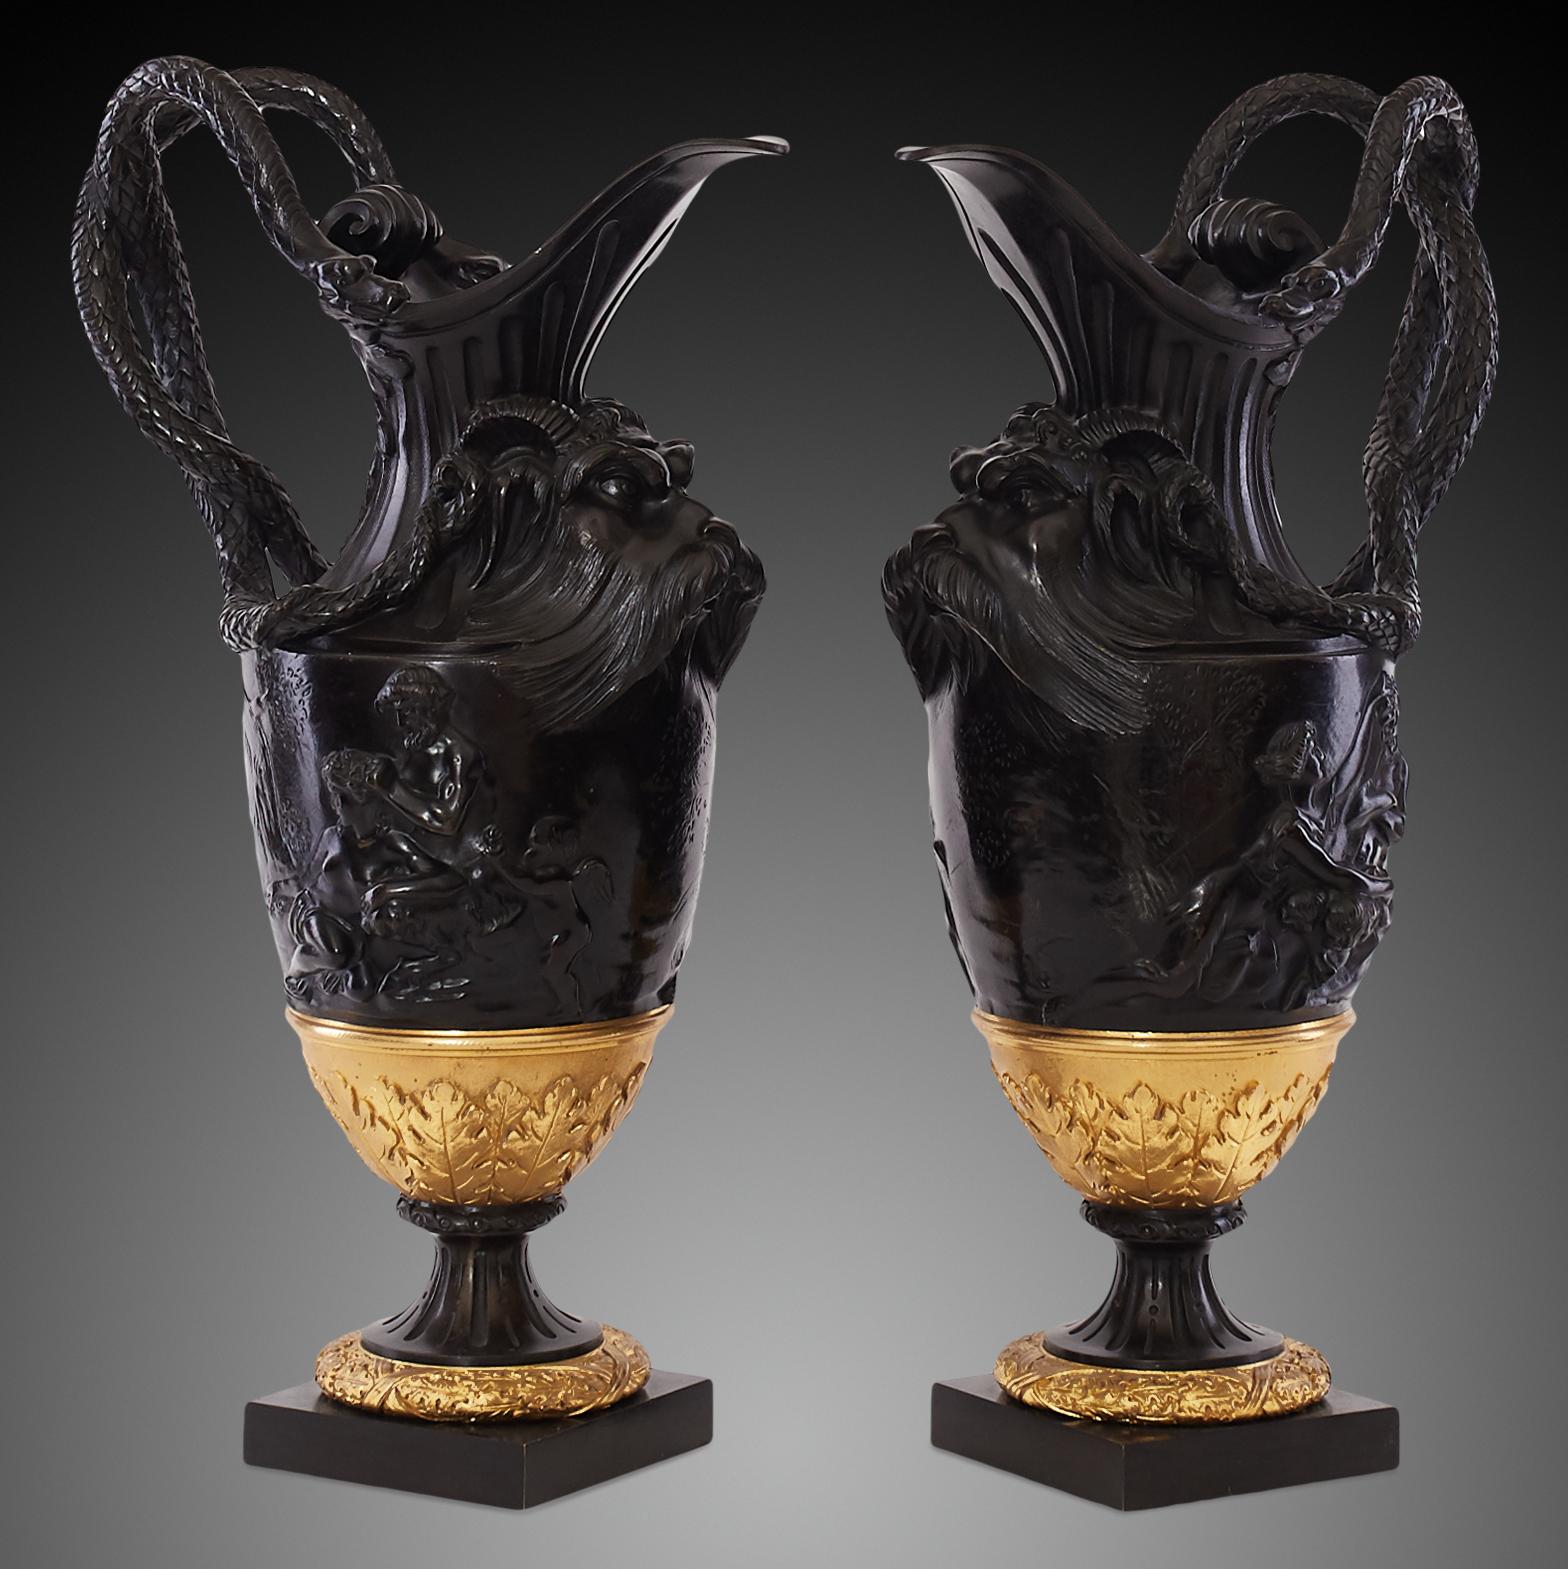 19th century gilt bronze two-piece Garniture after Claude Michel Clodion. Late 19th century gilt and patinated bronze two-piece garniture. After Claude Michel Clodion. Consisting of pair of urns with fluted spreading neck fronted with a grotesque